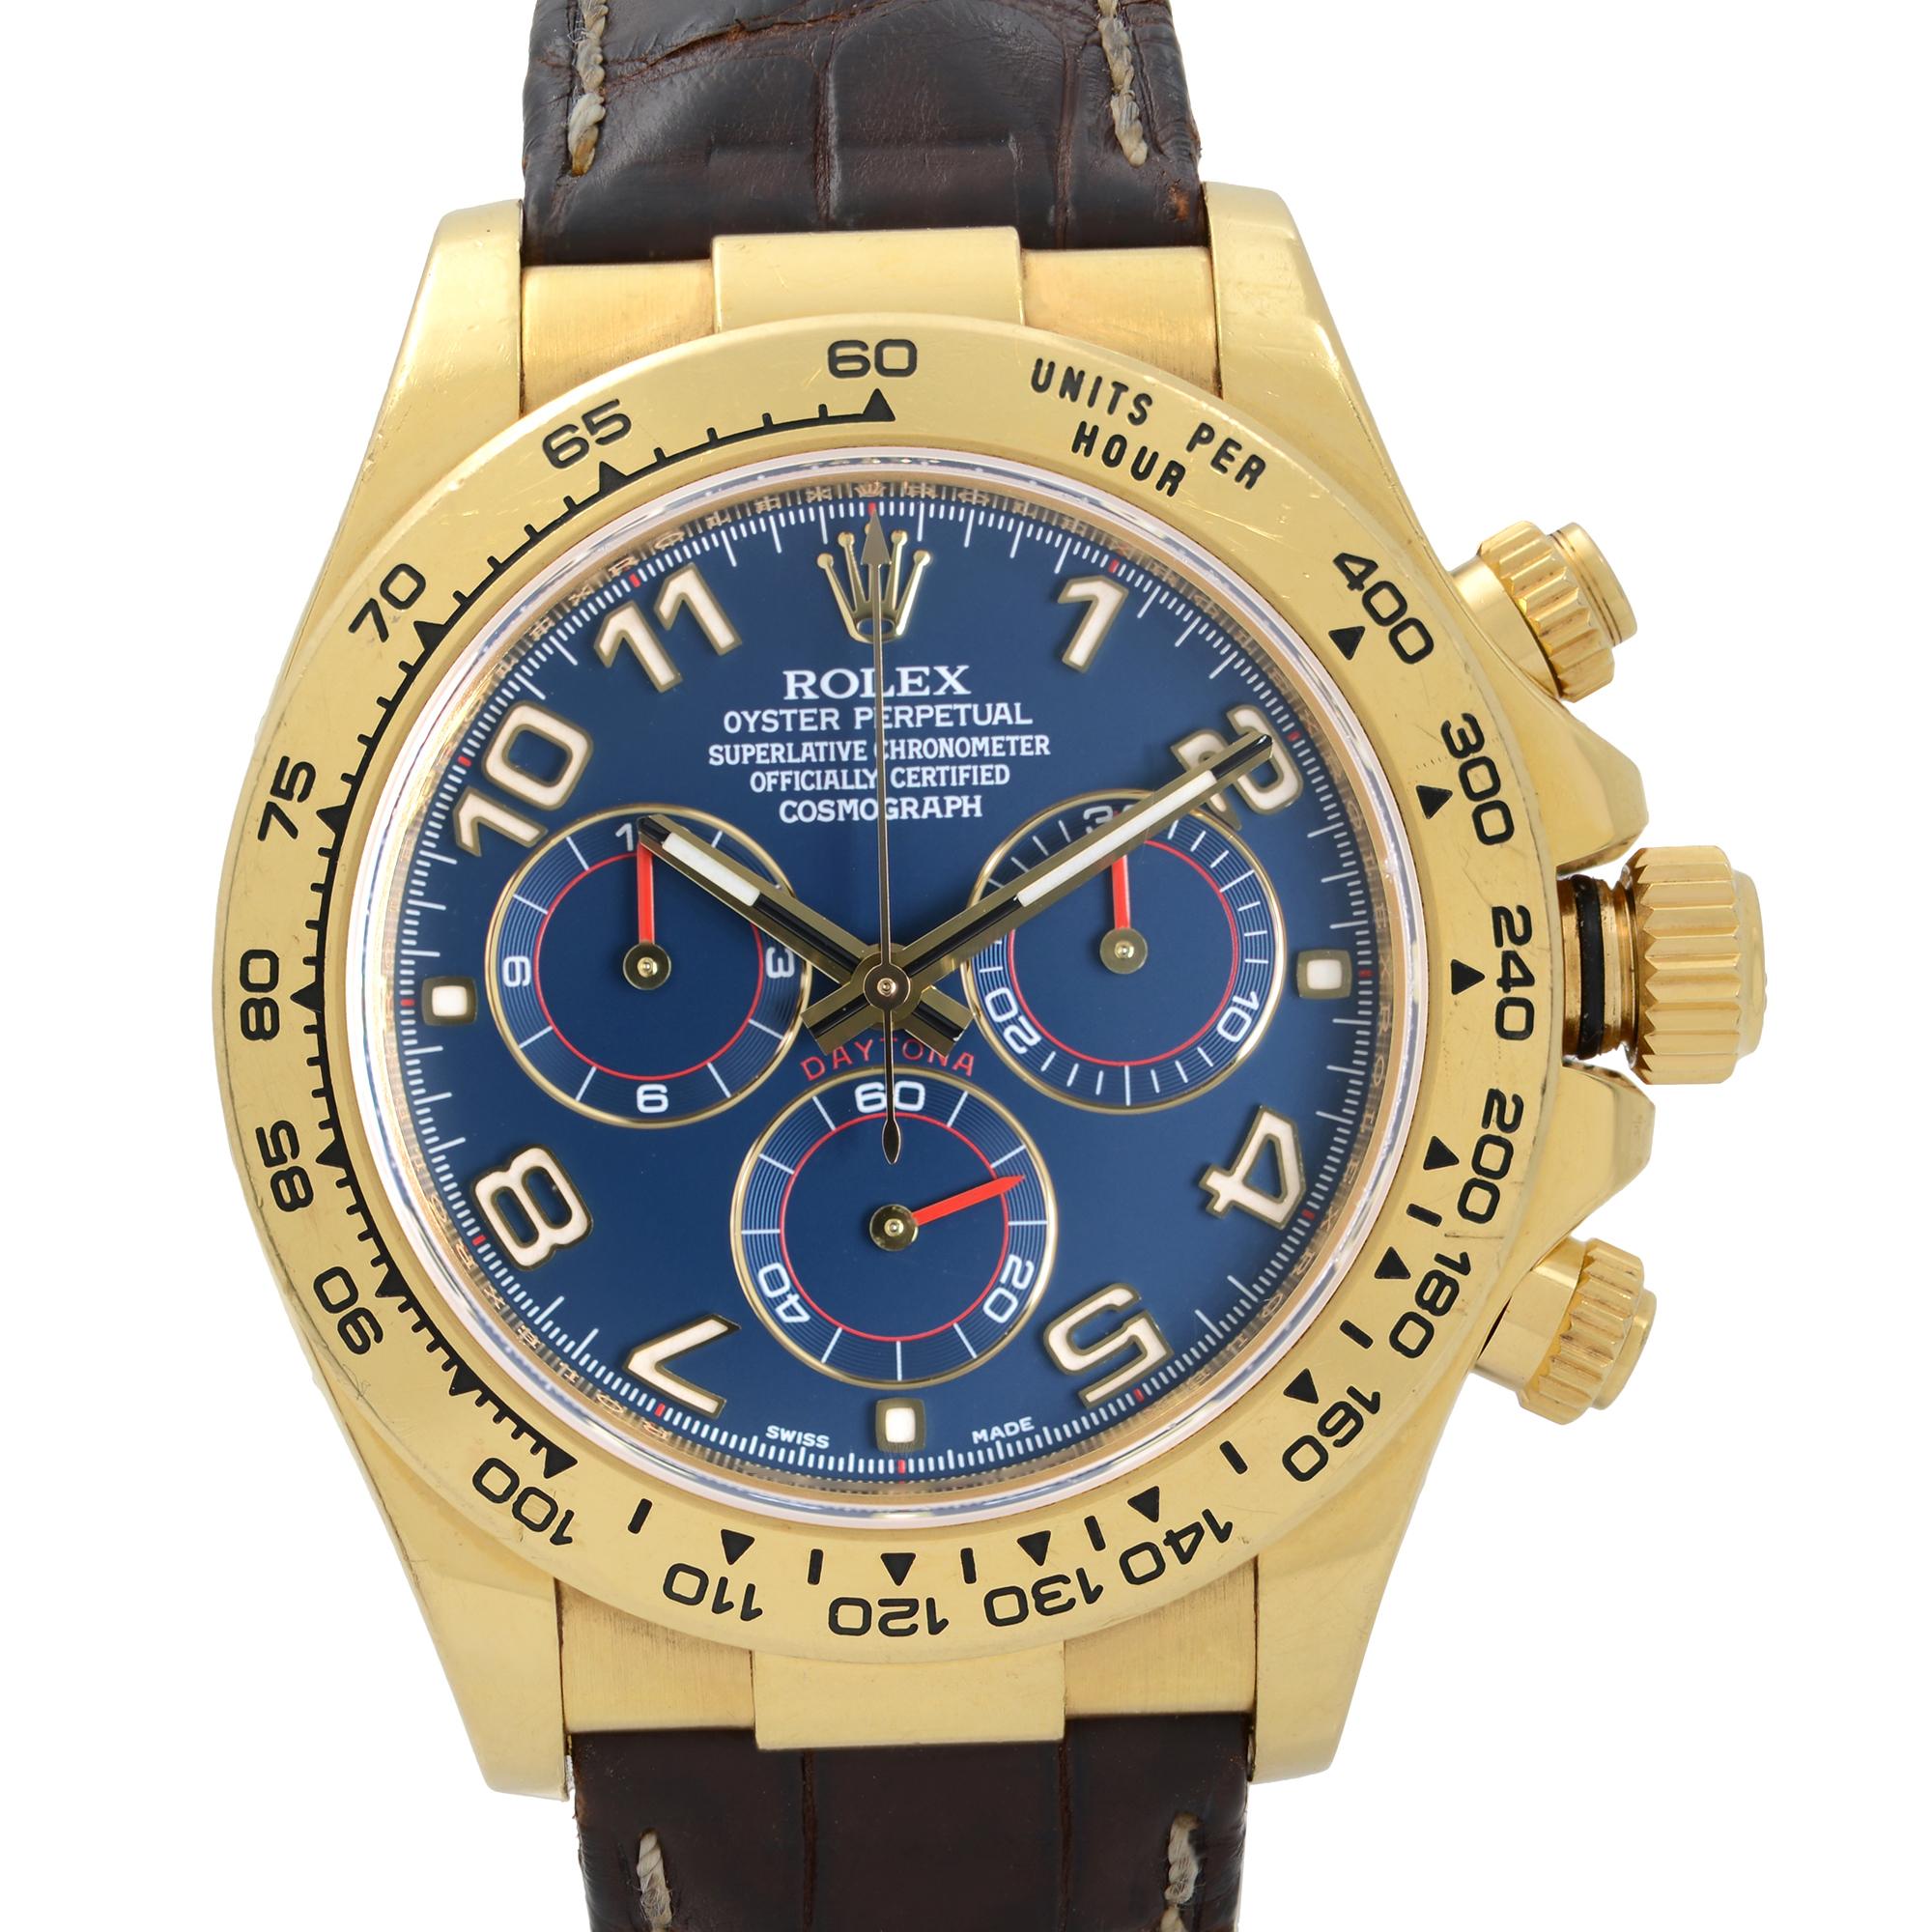 Pre Owned Rolex Daytona Cosmograph 18k Yellow Gold Blue Arabic Dial Mens Watch 116518. the band have visible wear signs on the inner side of the band. This Beautiful Timepiece is Powered by Mechanical (Automatic) Movement And Features: Round 18k